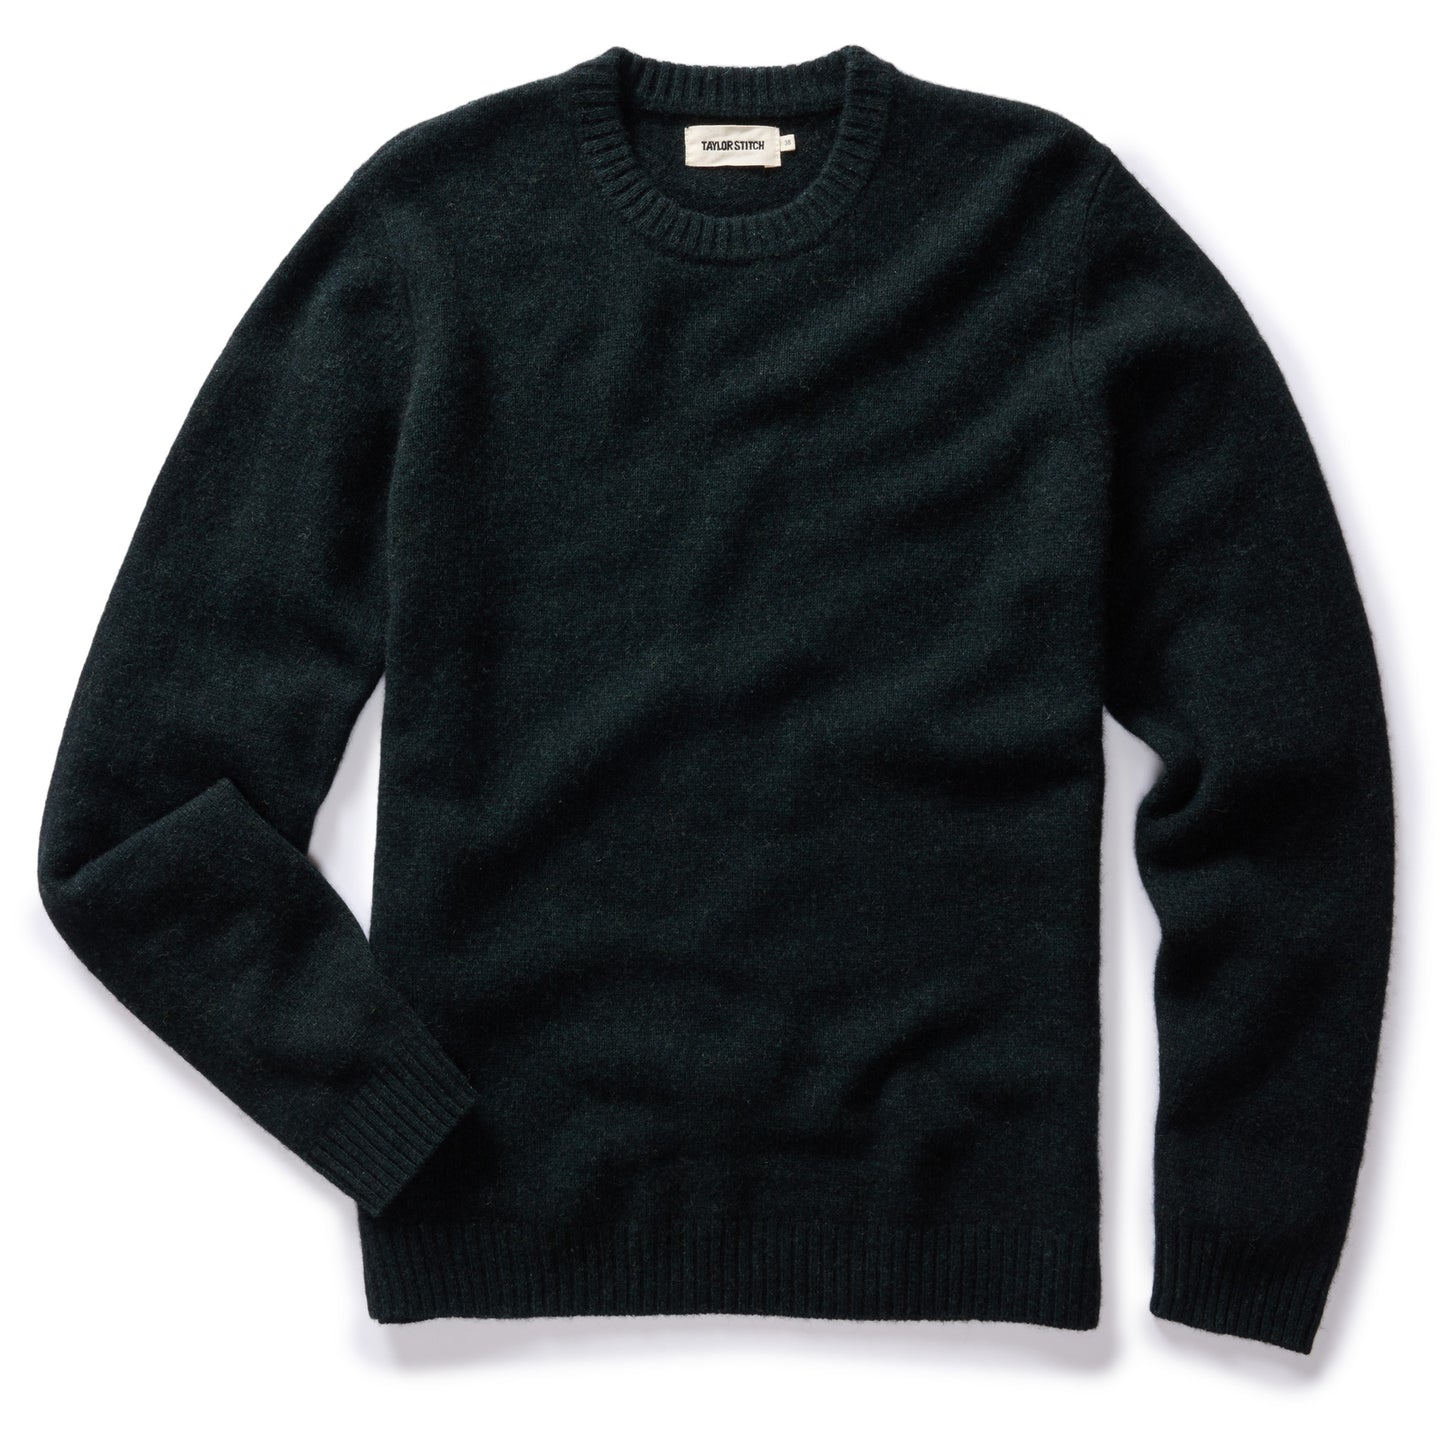 Taylor Stitch - The Lodge Sweater in Black Pine